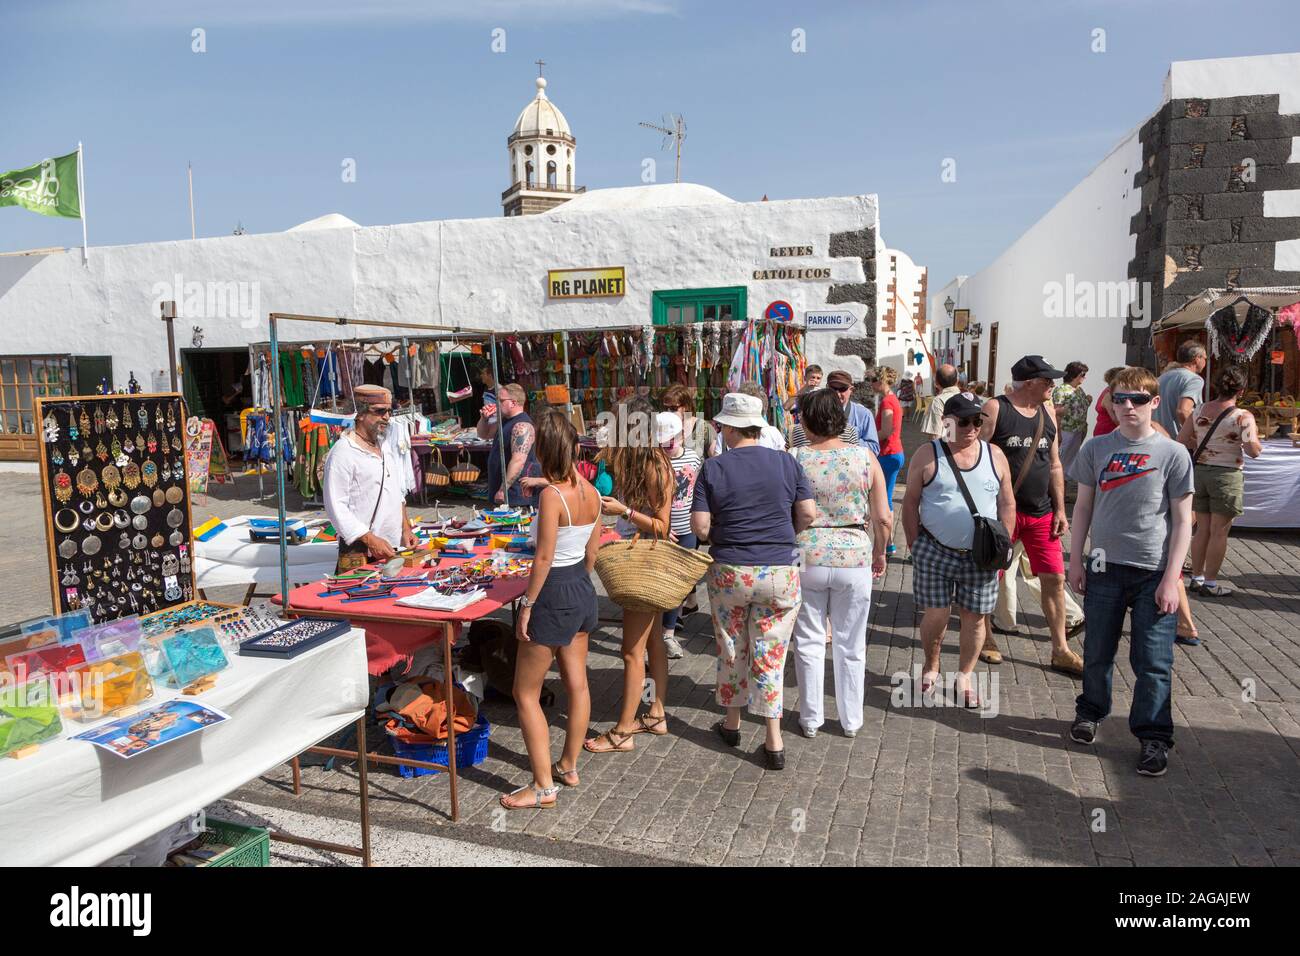 Craft market, Teguise, Lanzarote, Canary Islands, Spain Stock Photo